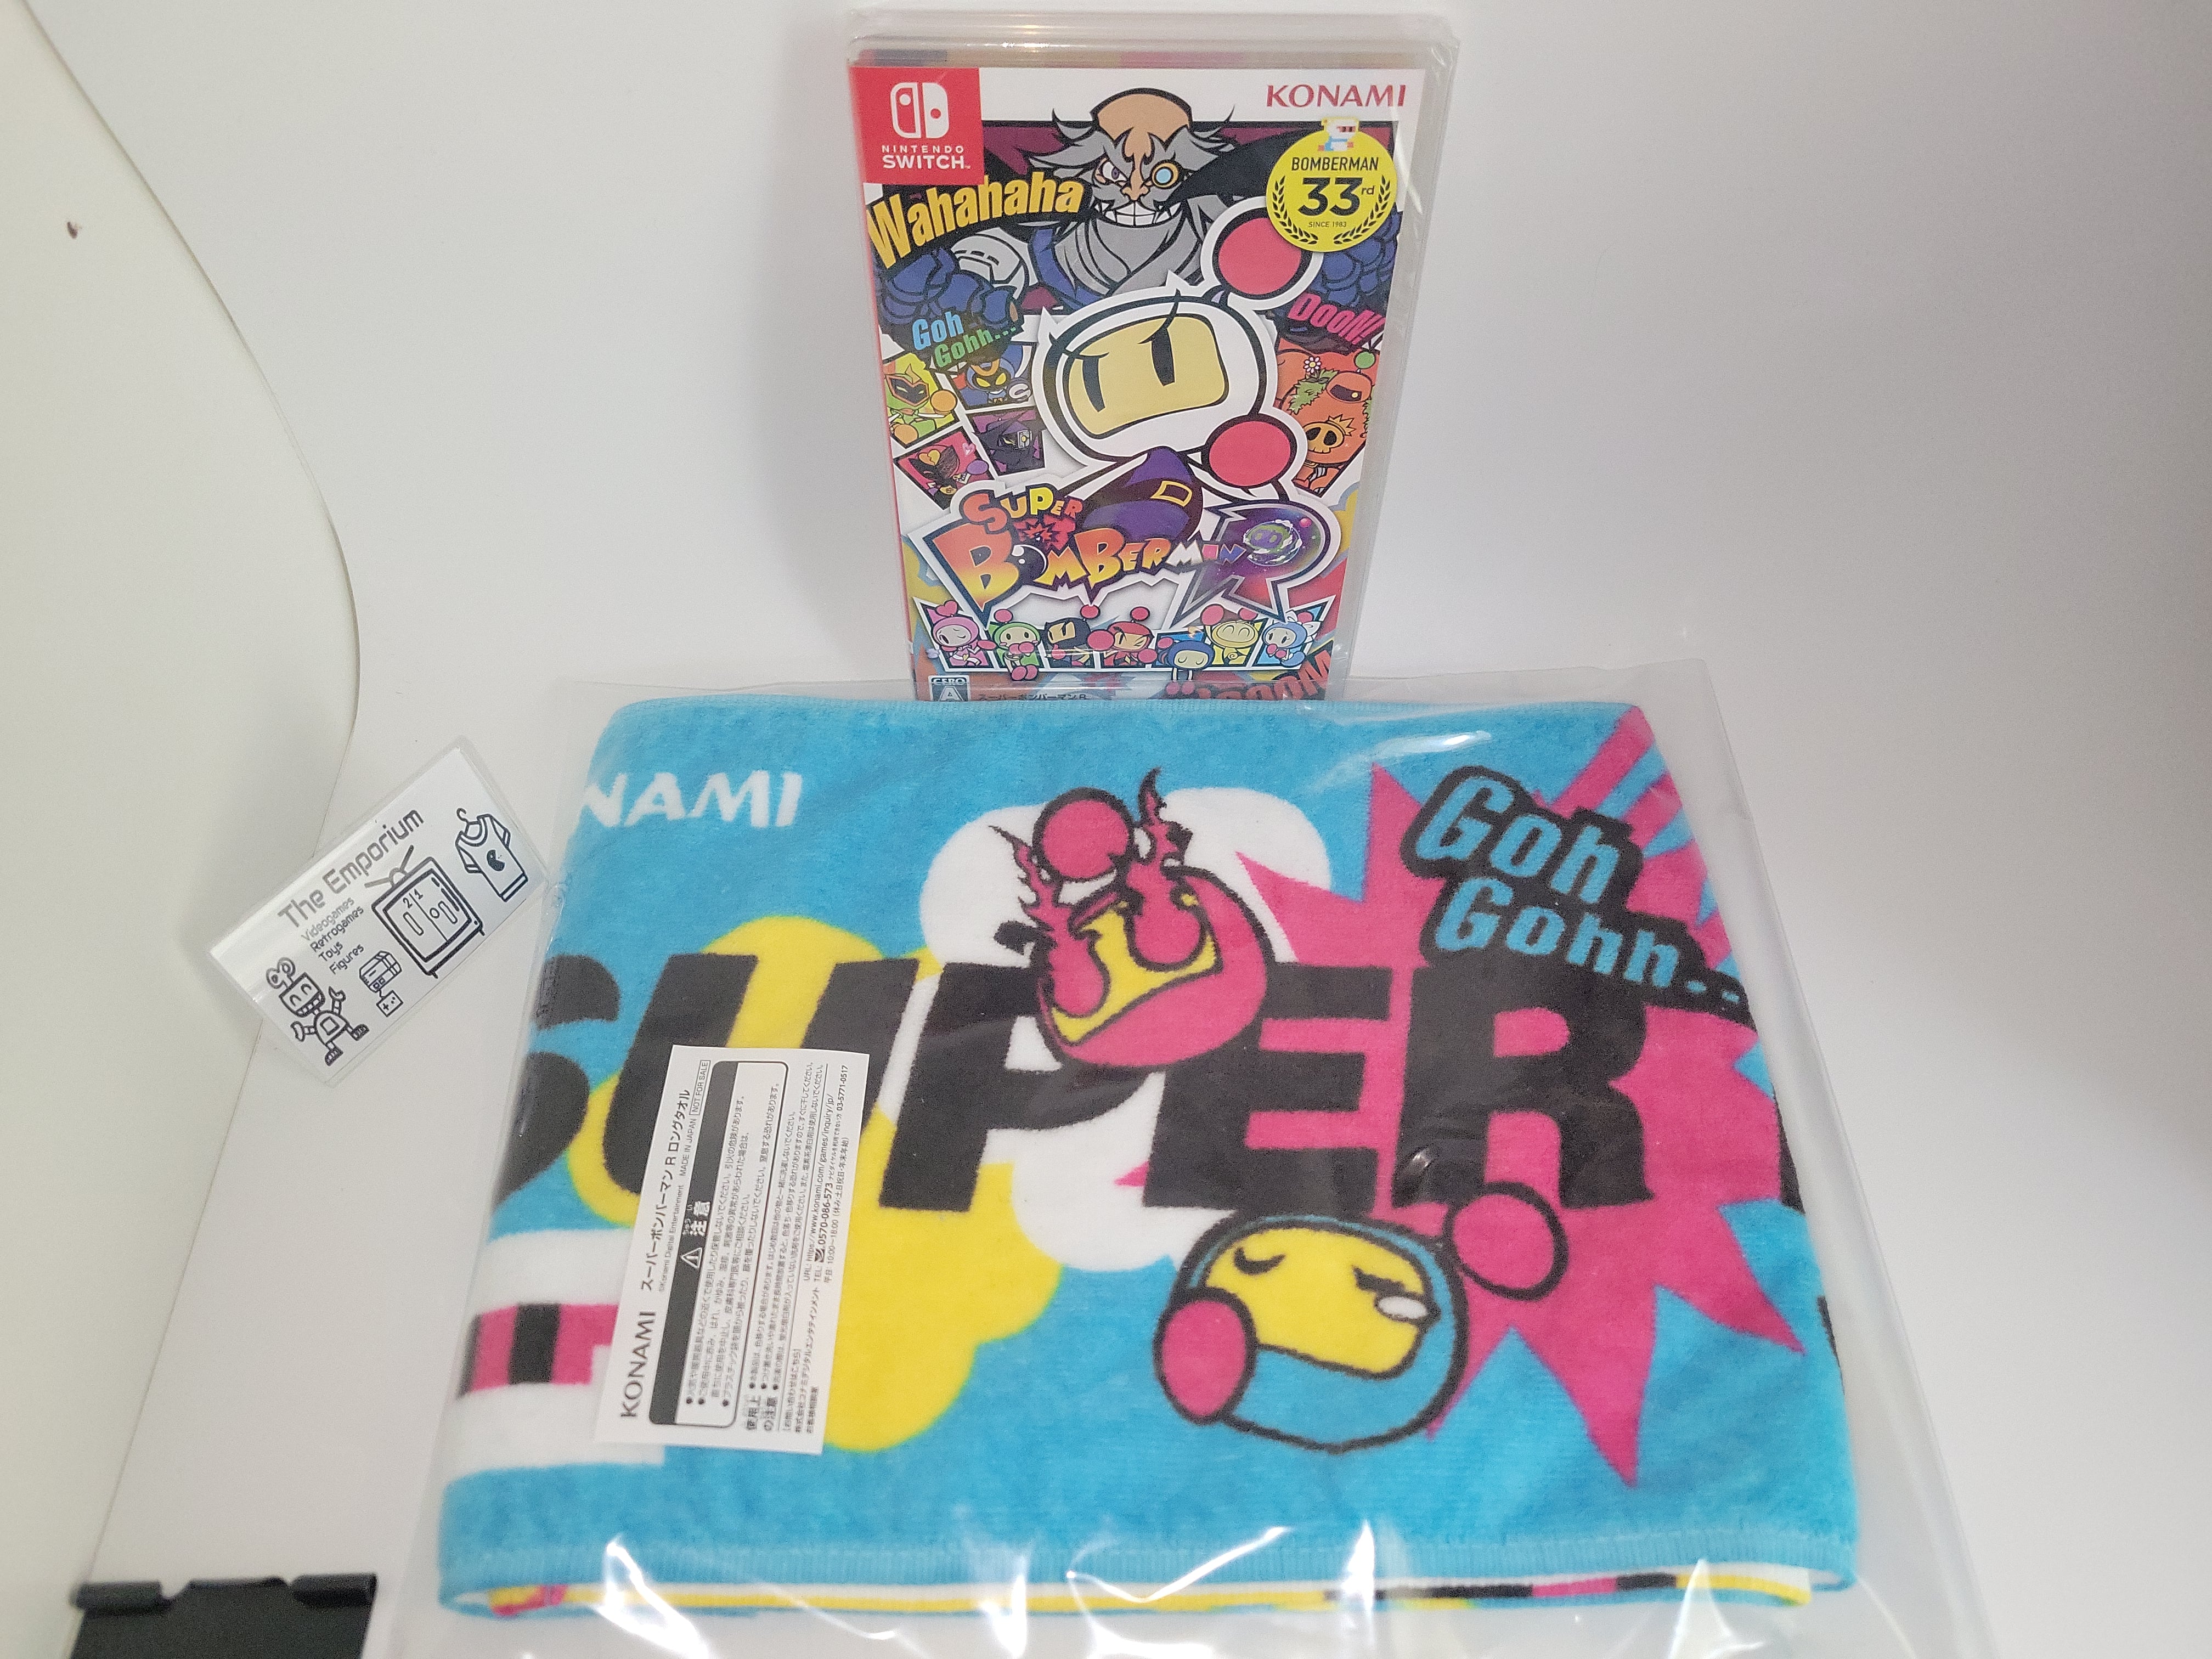 The Preorder Nintendo R with Bomberman RetroGames Toys - Limited Switch Emporium – Towel Konami Super and